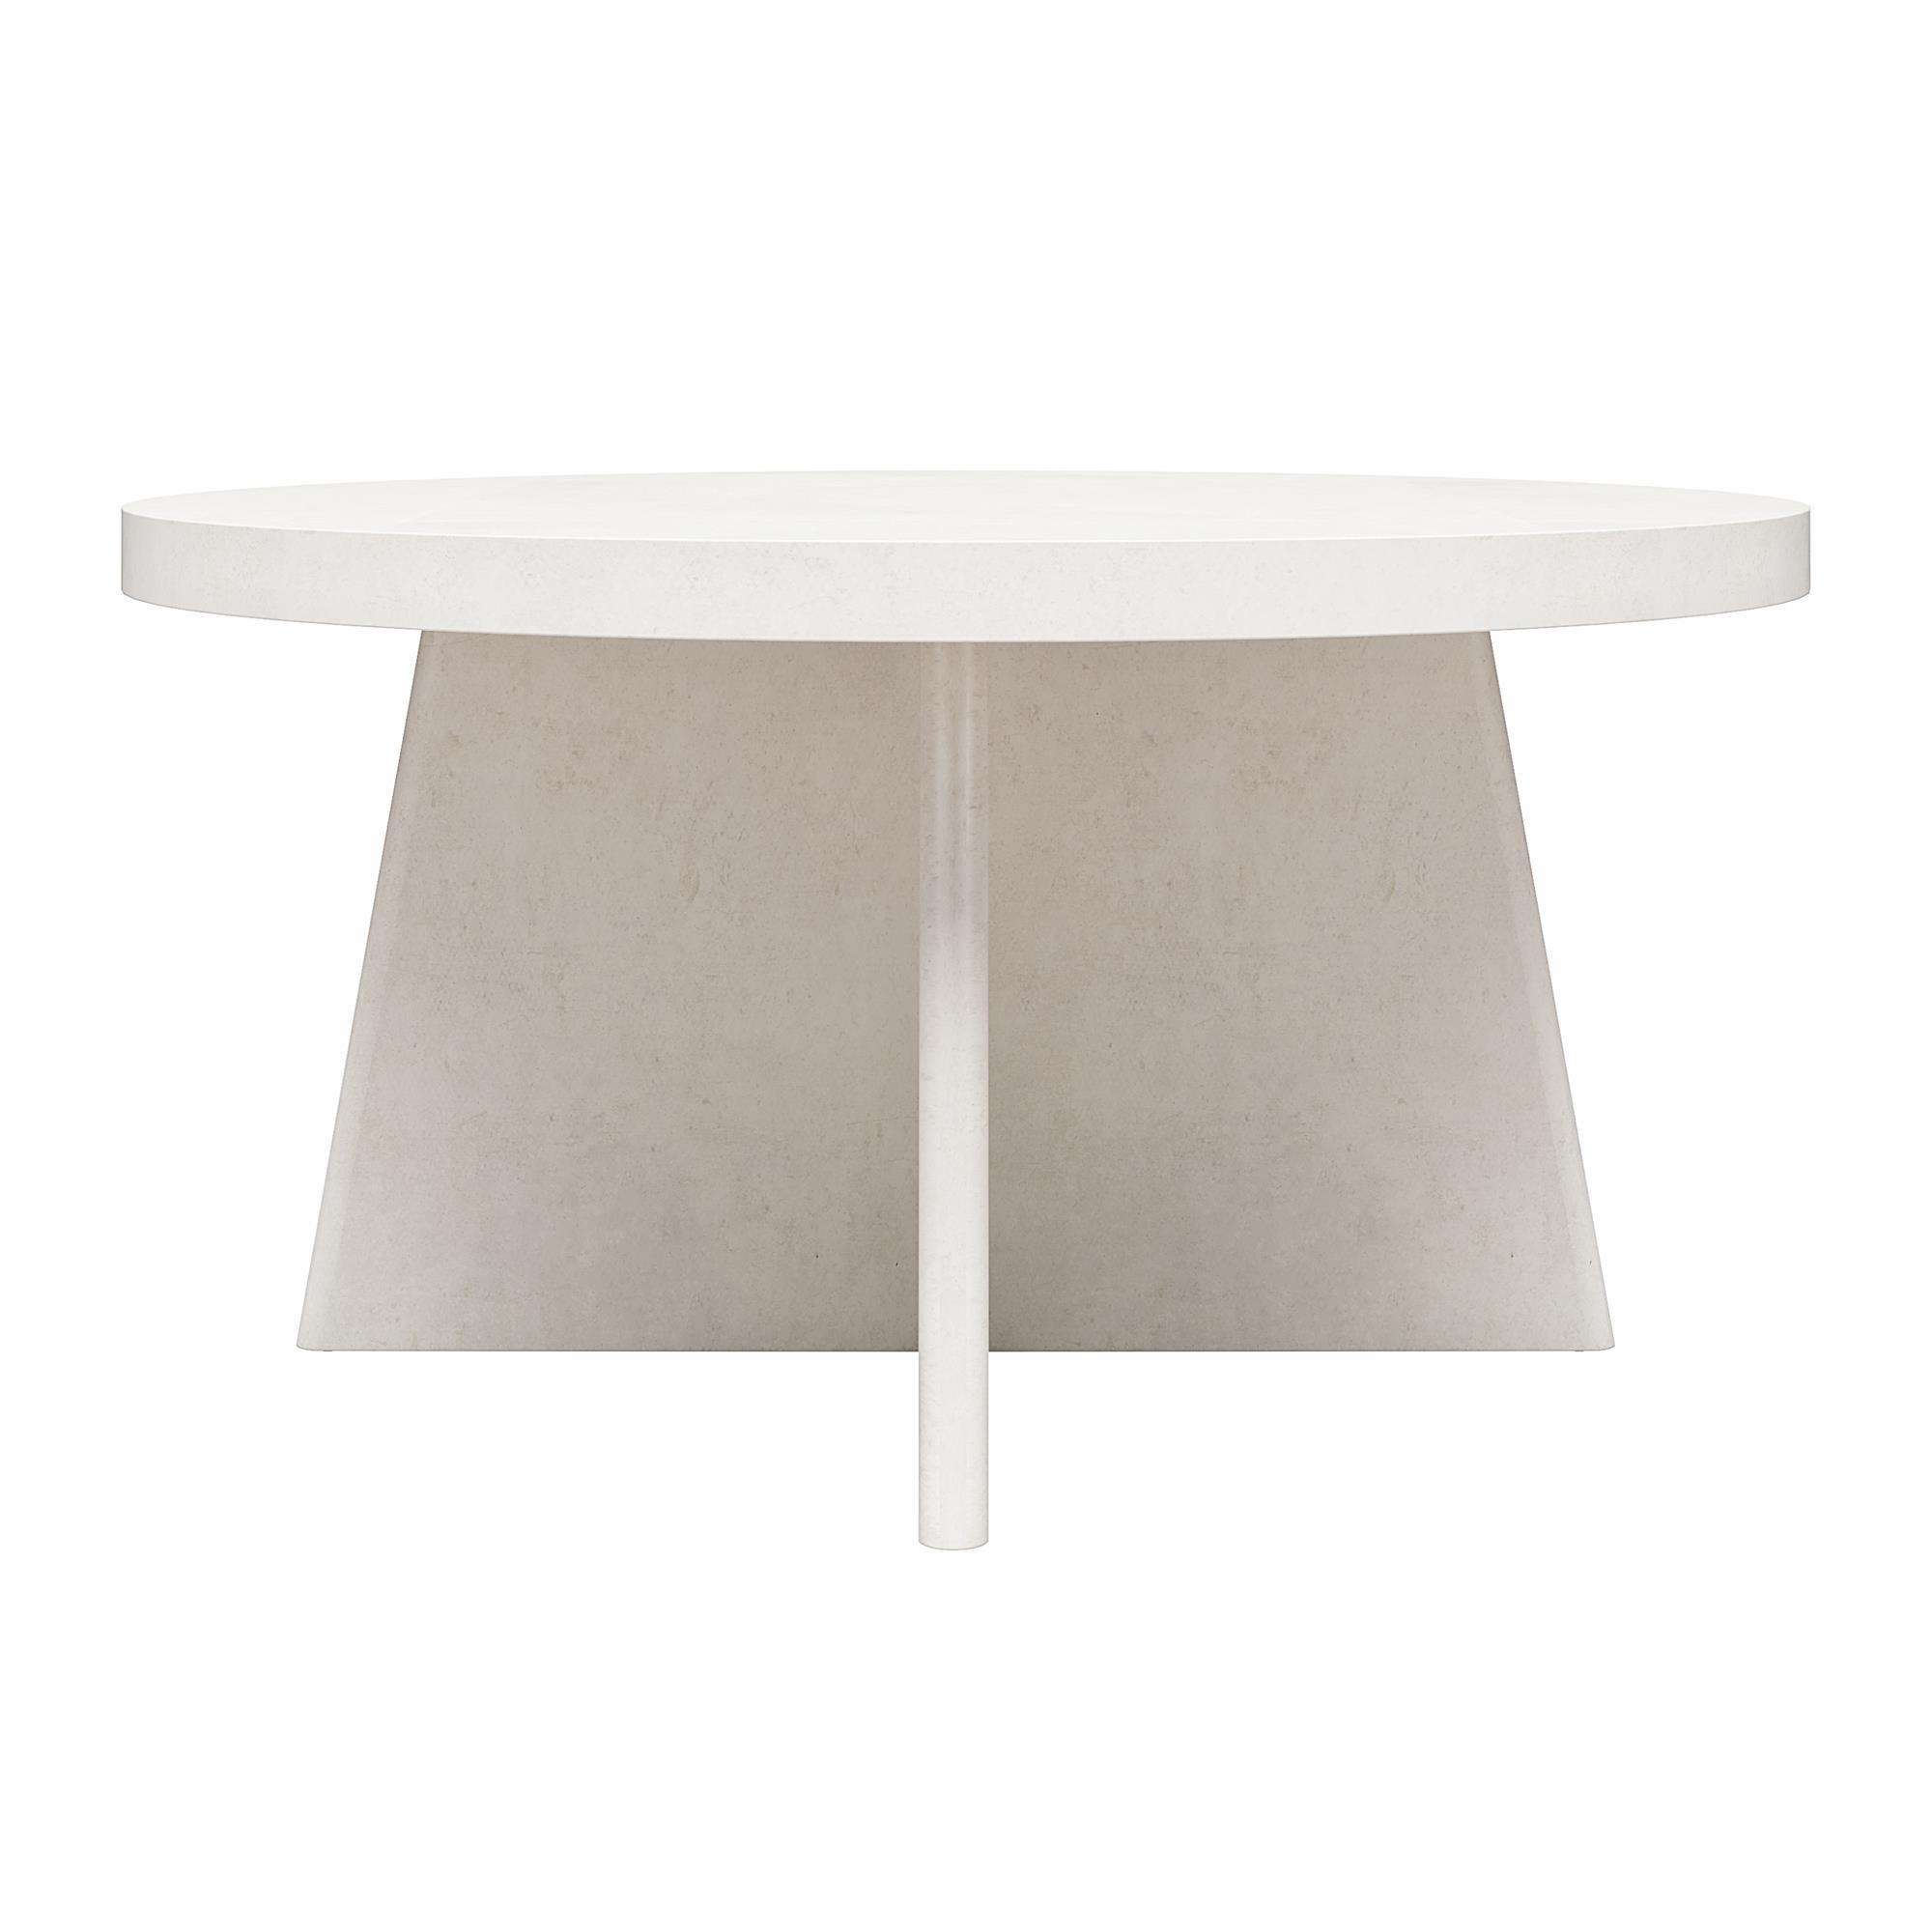 Ameriwood Home Liam Coffee Table, Faux Plaster - image 5 of 11